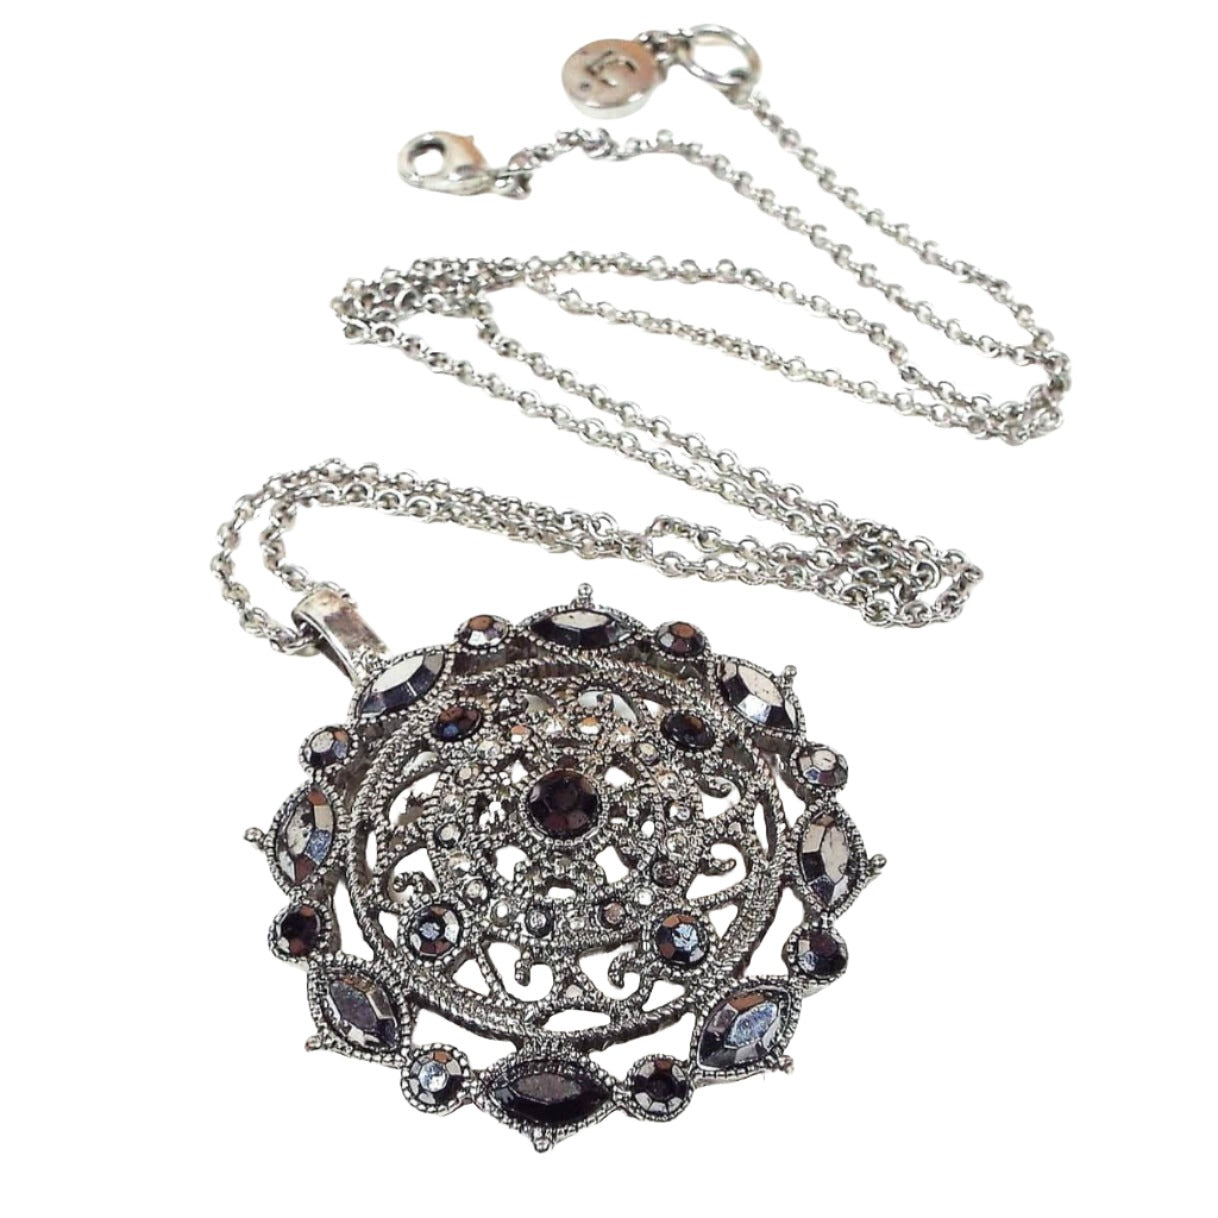 Front view of the retro vintage Liz Claiborne pendant necklace. The chain is silver tone in color. The pendant is antiqued silver tone in color with a round filigree design and various sizes and shapes of metallic gray faux marcasite rhinestones. There is a lobster claw clasp at the end and a hang tag with LC on it.